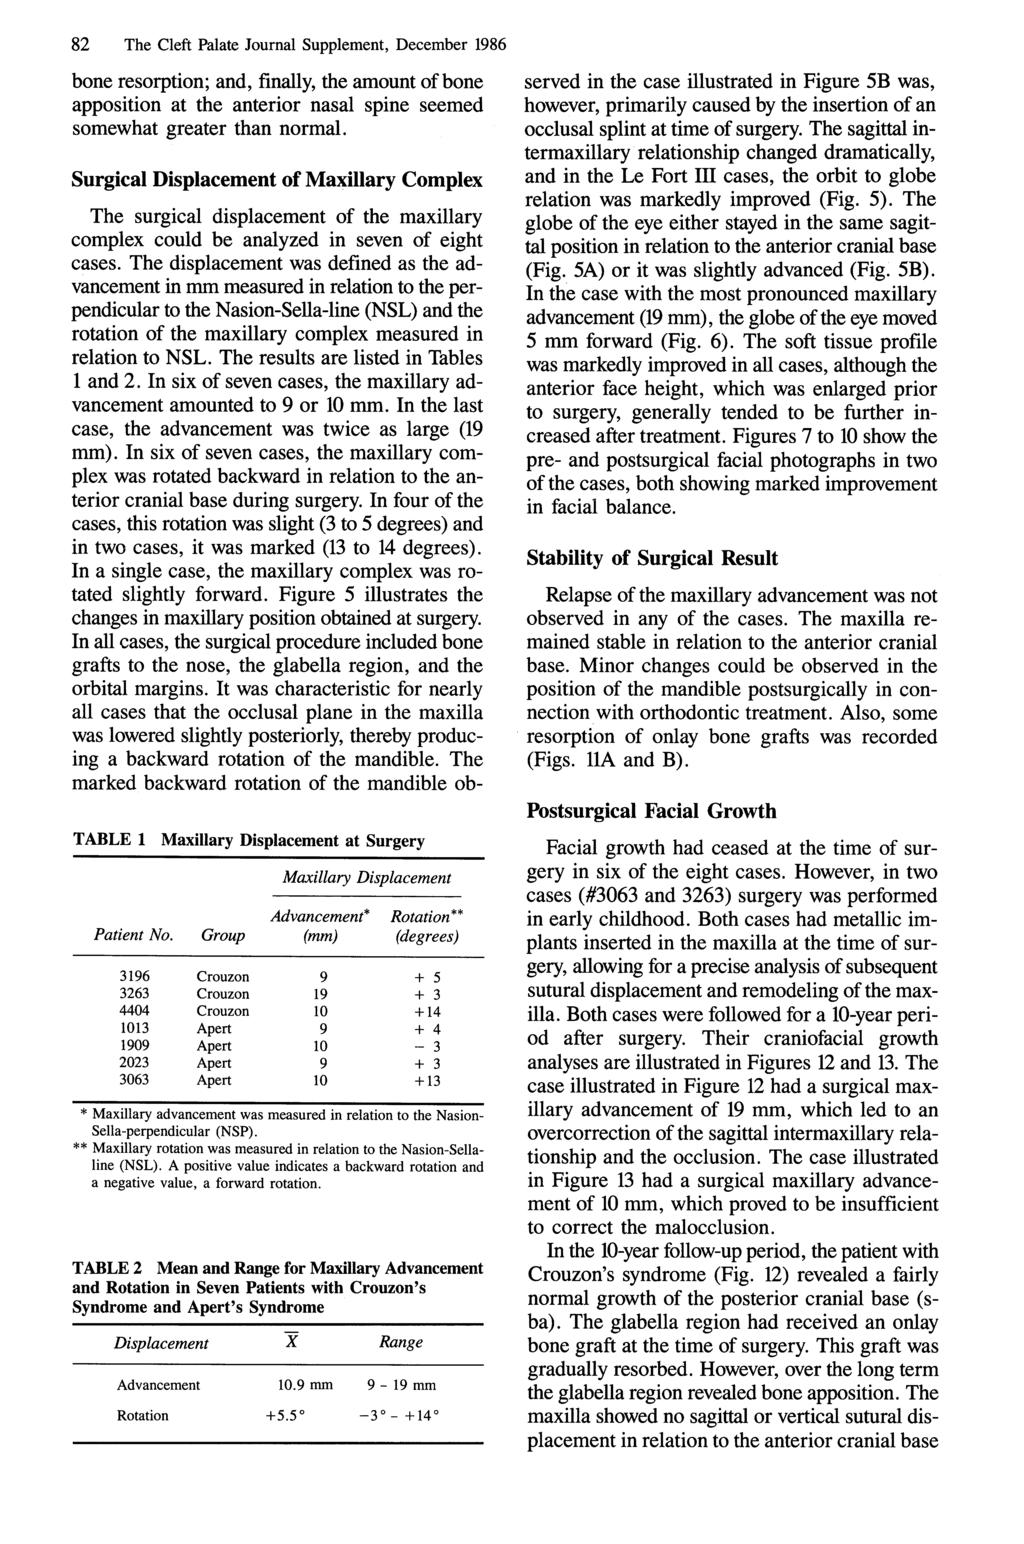 82 The Cleft Palate Journal Supplement, December 1986 bone resorption; and, finally, the amount of bone apposition at the anterior nasal spine seemed somewhat greater than normal.